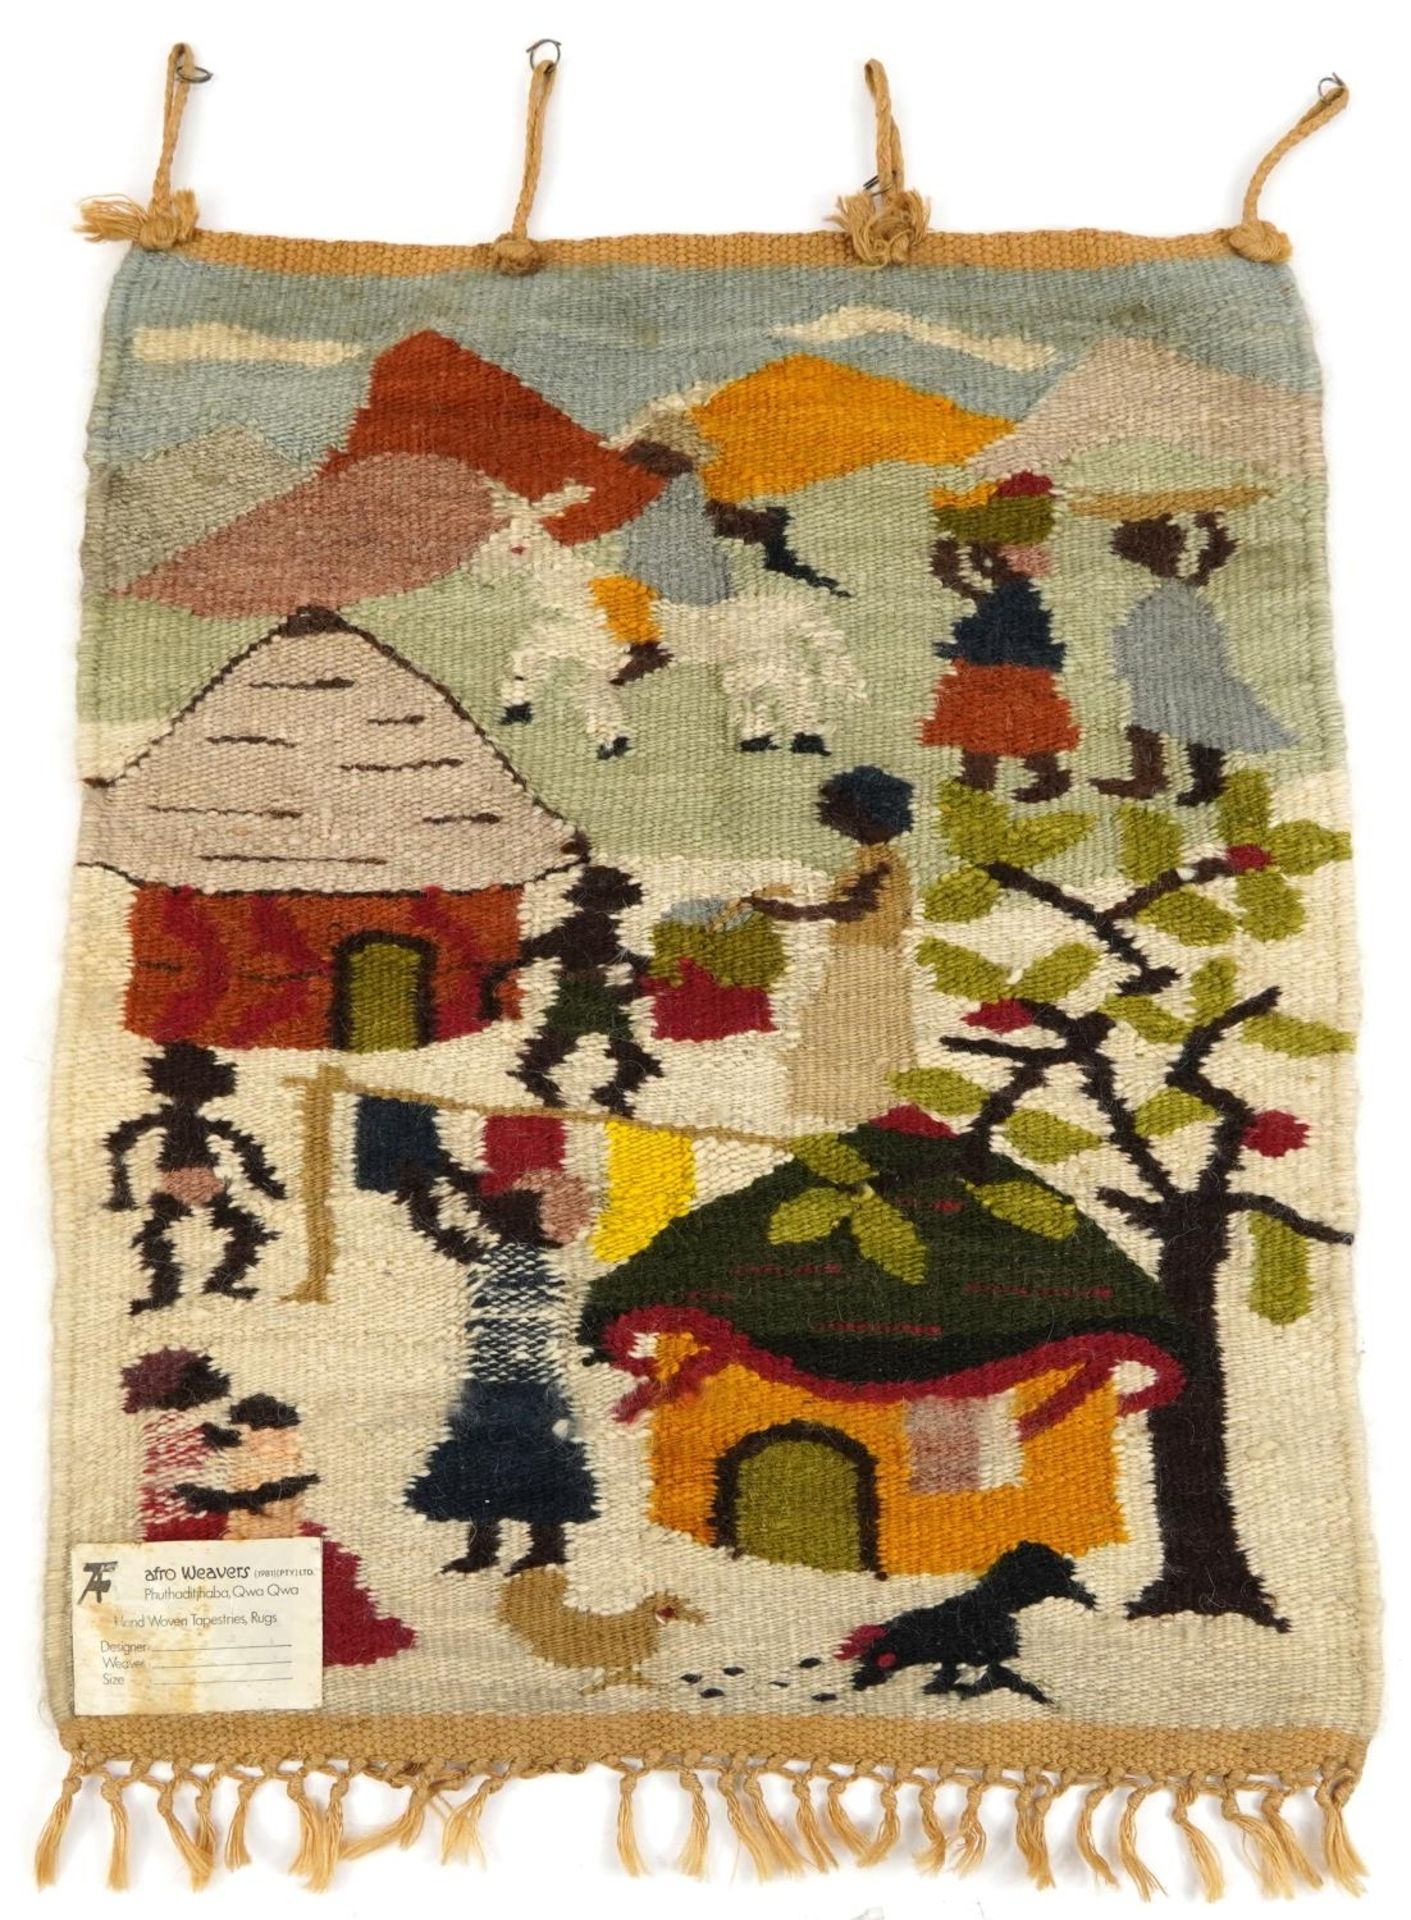 Afro Weavers hand woven wall hanging woven with a figure outside a cottage, 80cm x 62cm For - Image 3 of 4